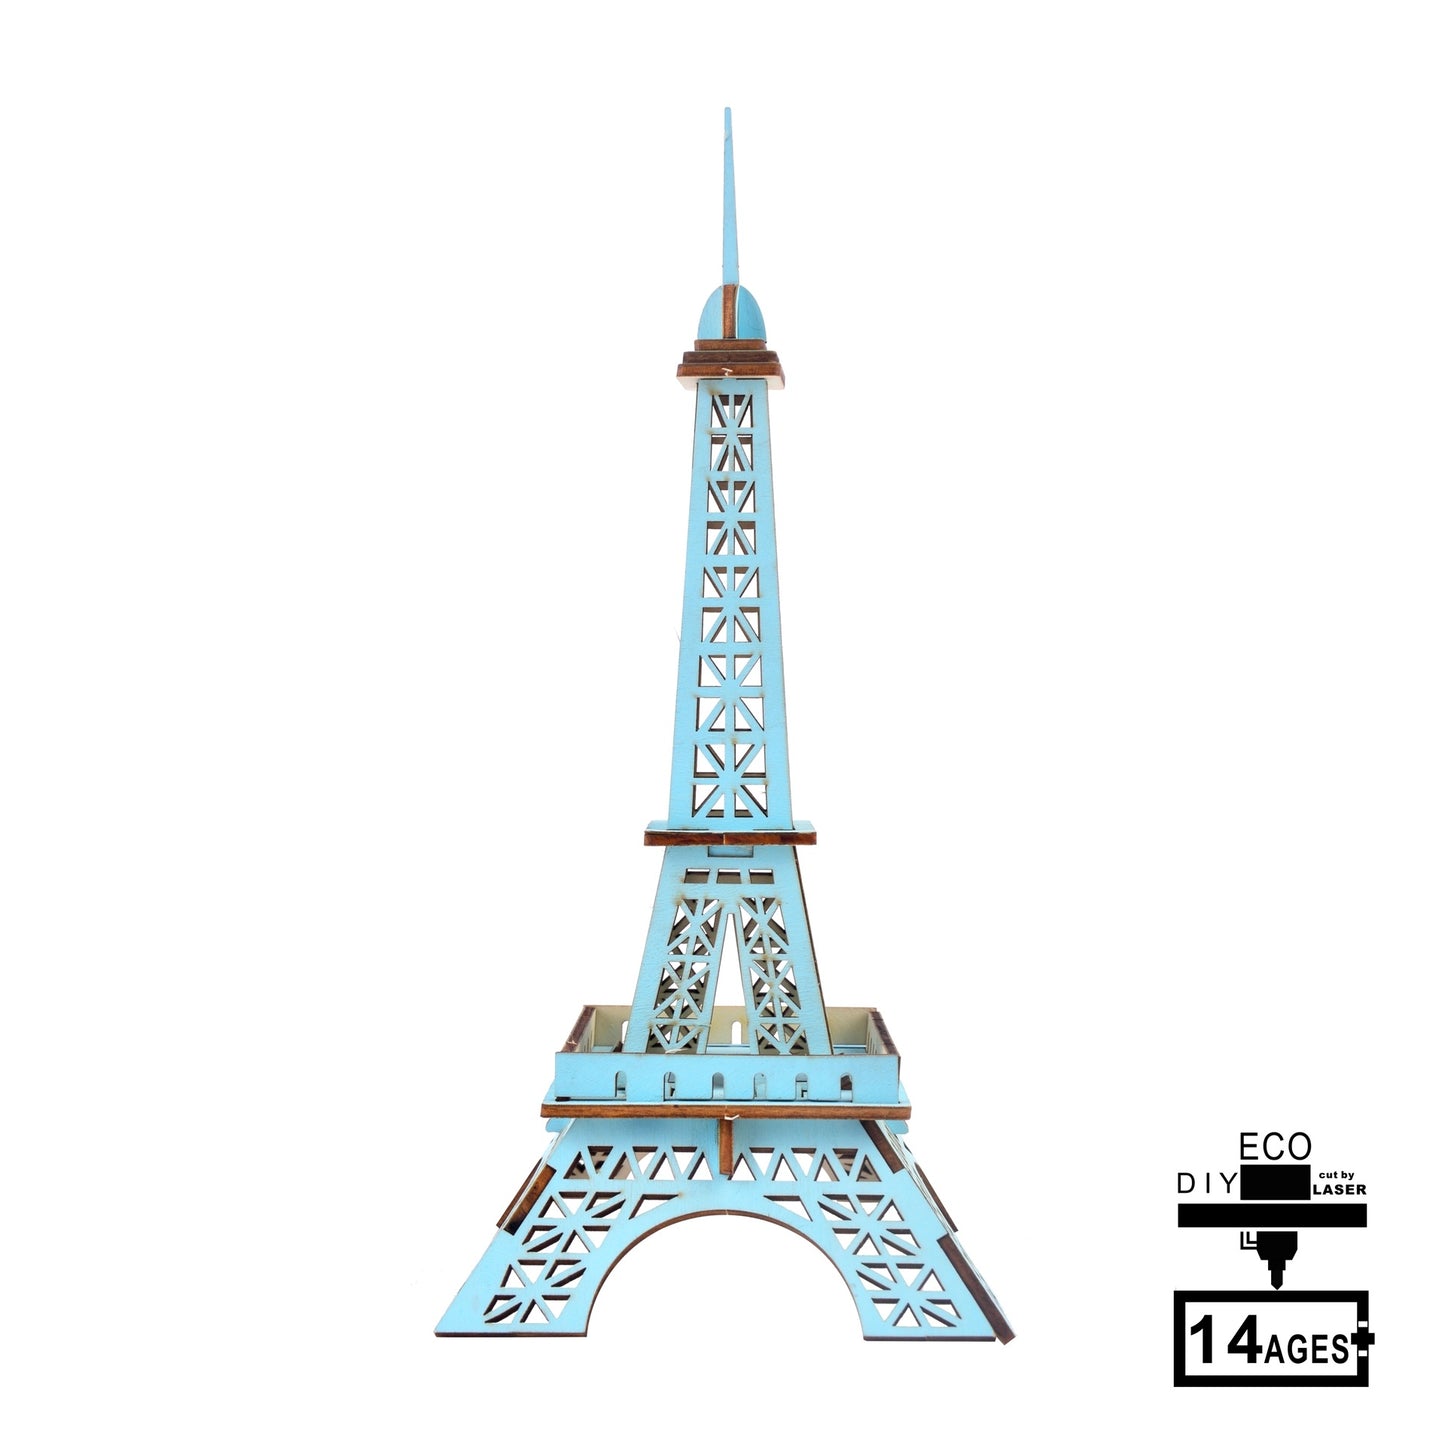  Little Paris Tower Stereo Jigsaw Puzzle - DIY Educational Toy for Children cashymart